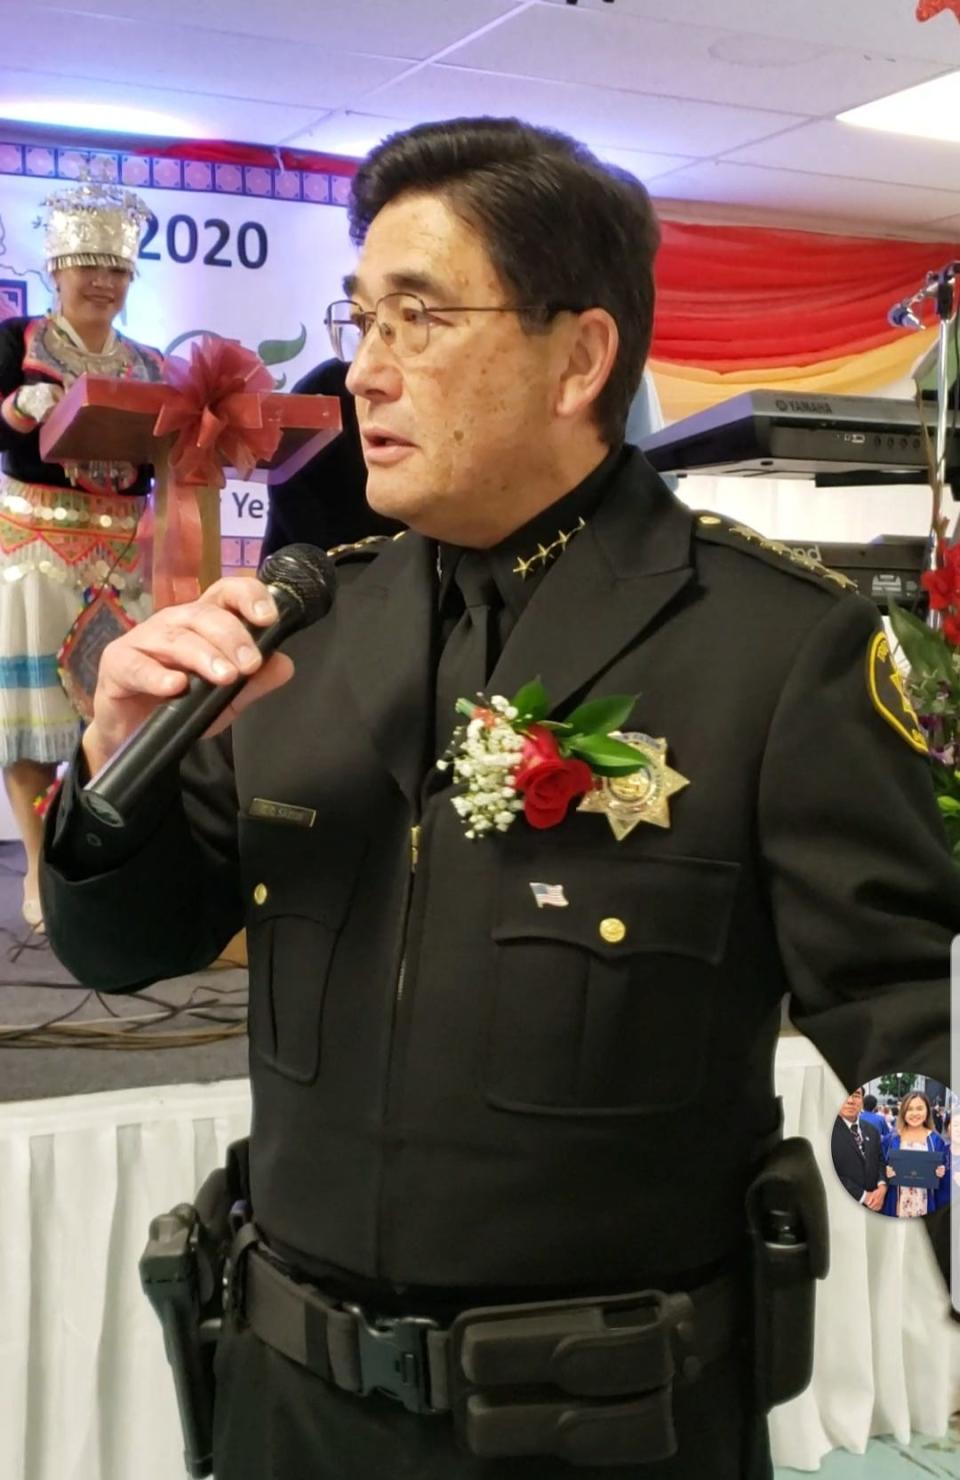 Sheriff Tim Saxon of Trinity County, California, is shown at a celebration of local Hmong residents. Saxon was born in Japan and immediately adopted by a U.S. serviceman. Saxon, who was elected sheriff in 2018, is the first Asian American sheriff in the state's history — a discovery that resulted from a recent USA TODAY profile of San Francisco's new sheriff, Paul Miyamoto, whose office believed was the first sheriff in the state of Asian decent.